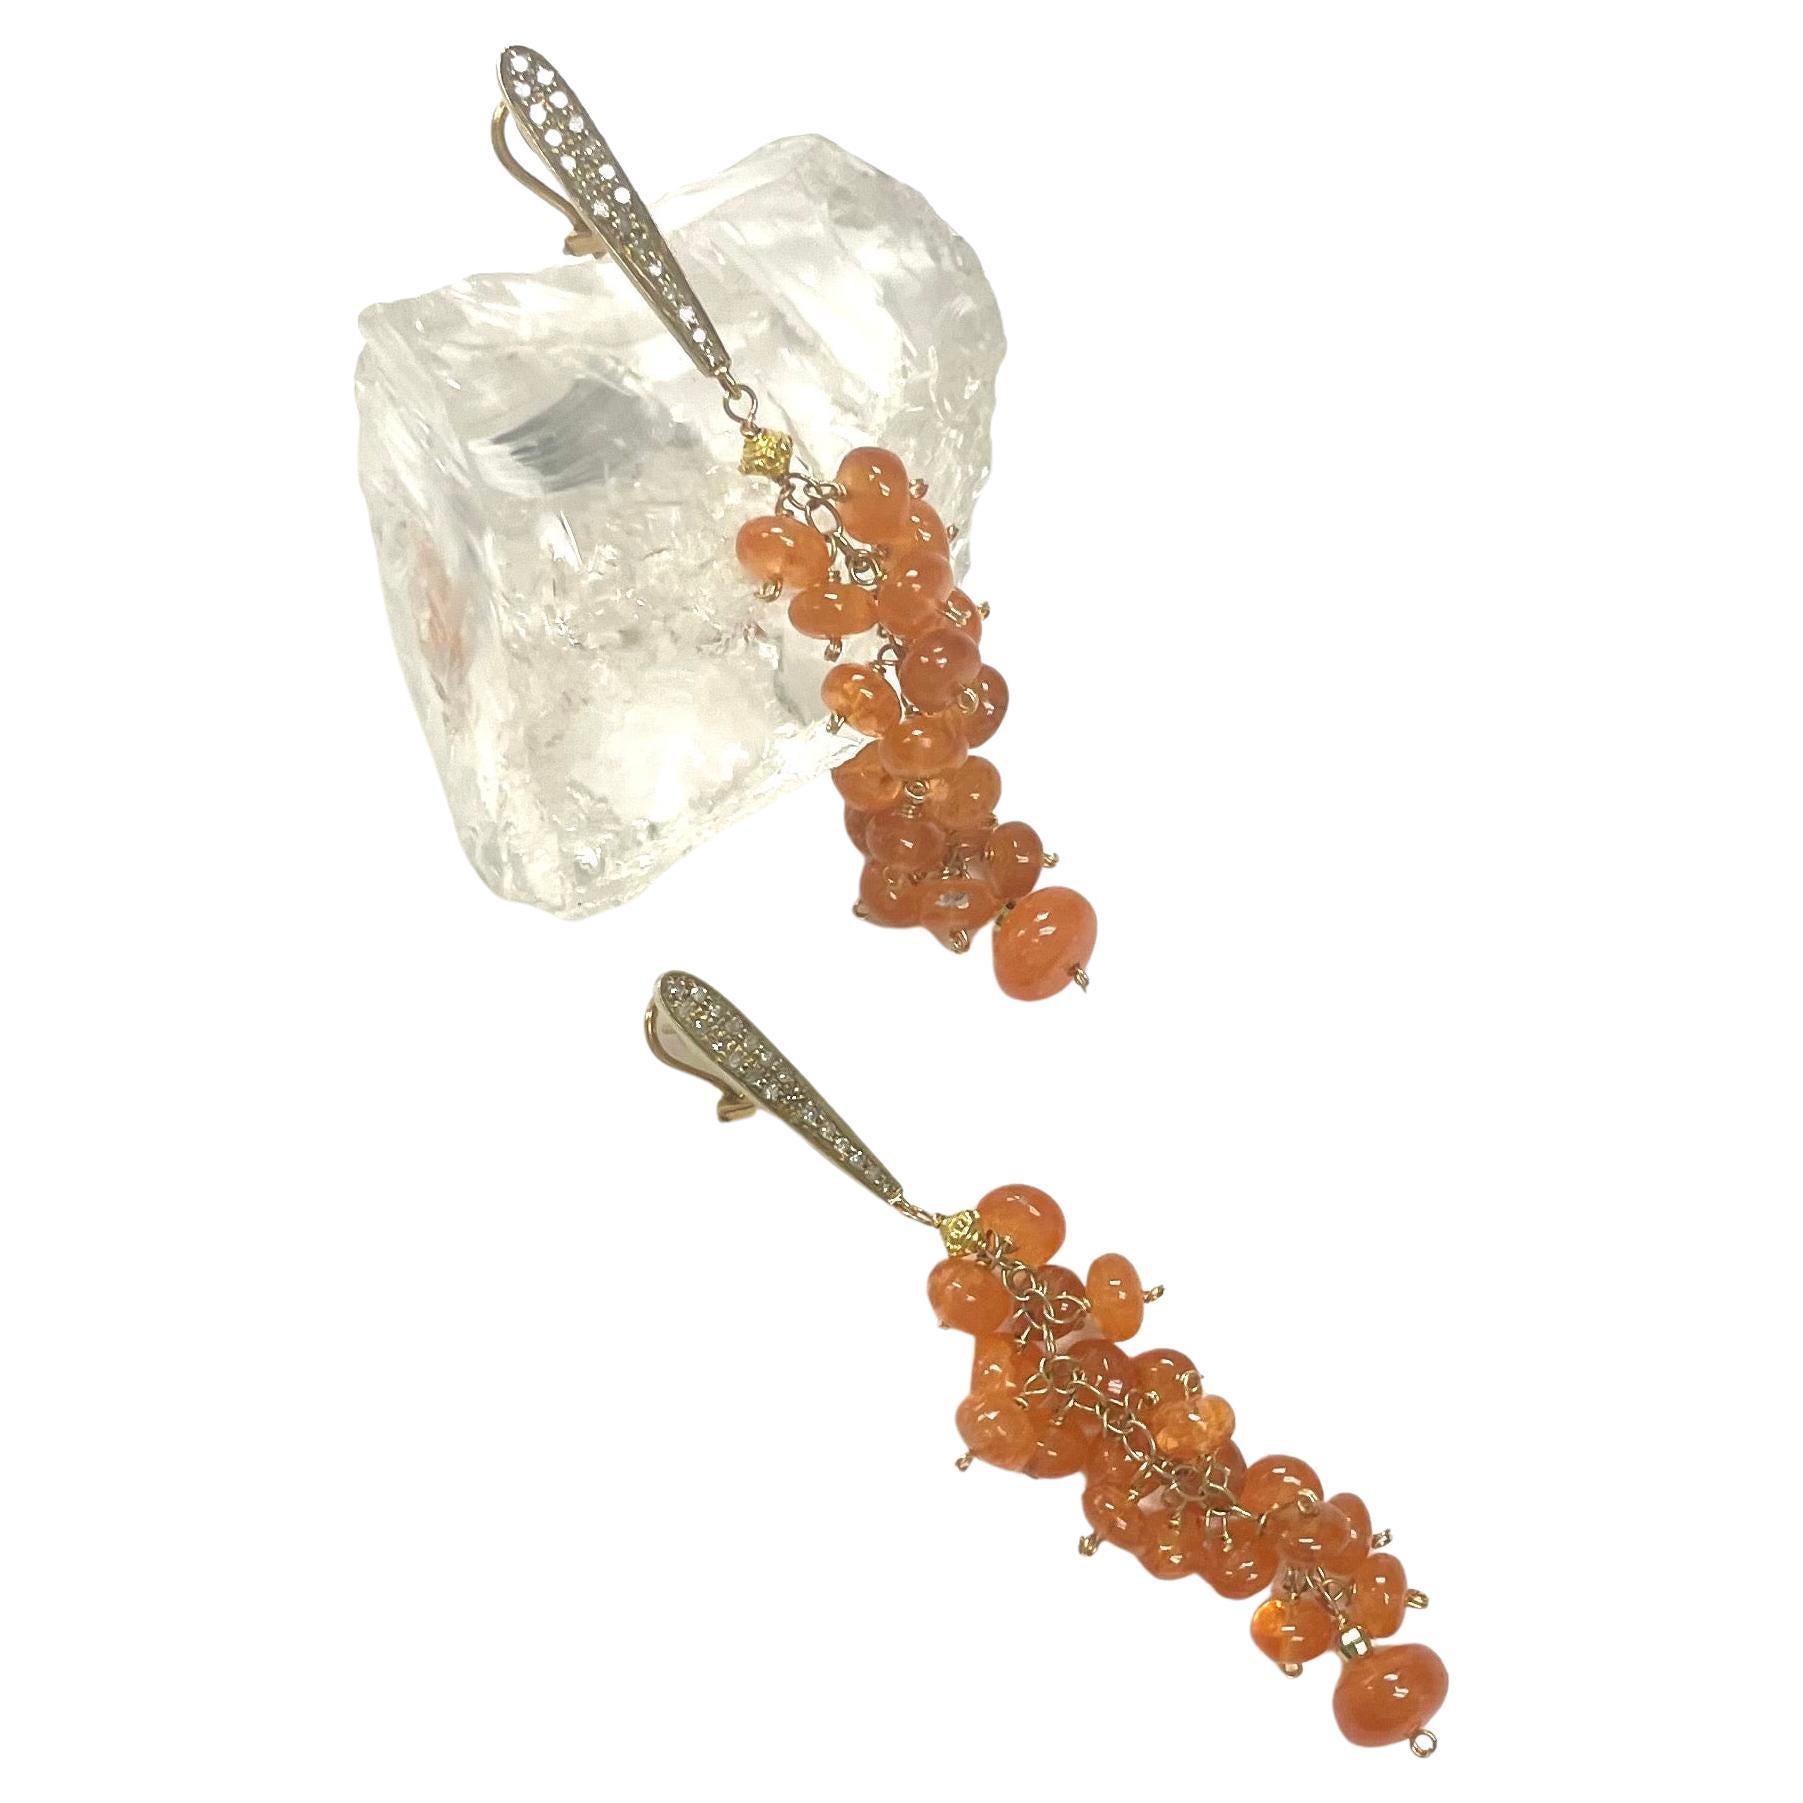 92 Carats Orange Spessartite with Gold and Diamonds Cluster Earrings For Sale 1